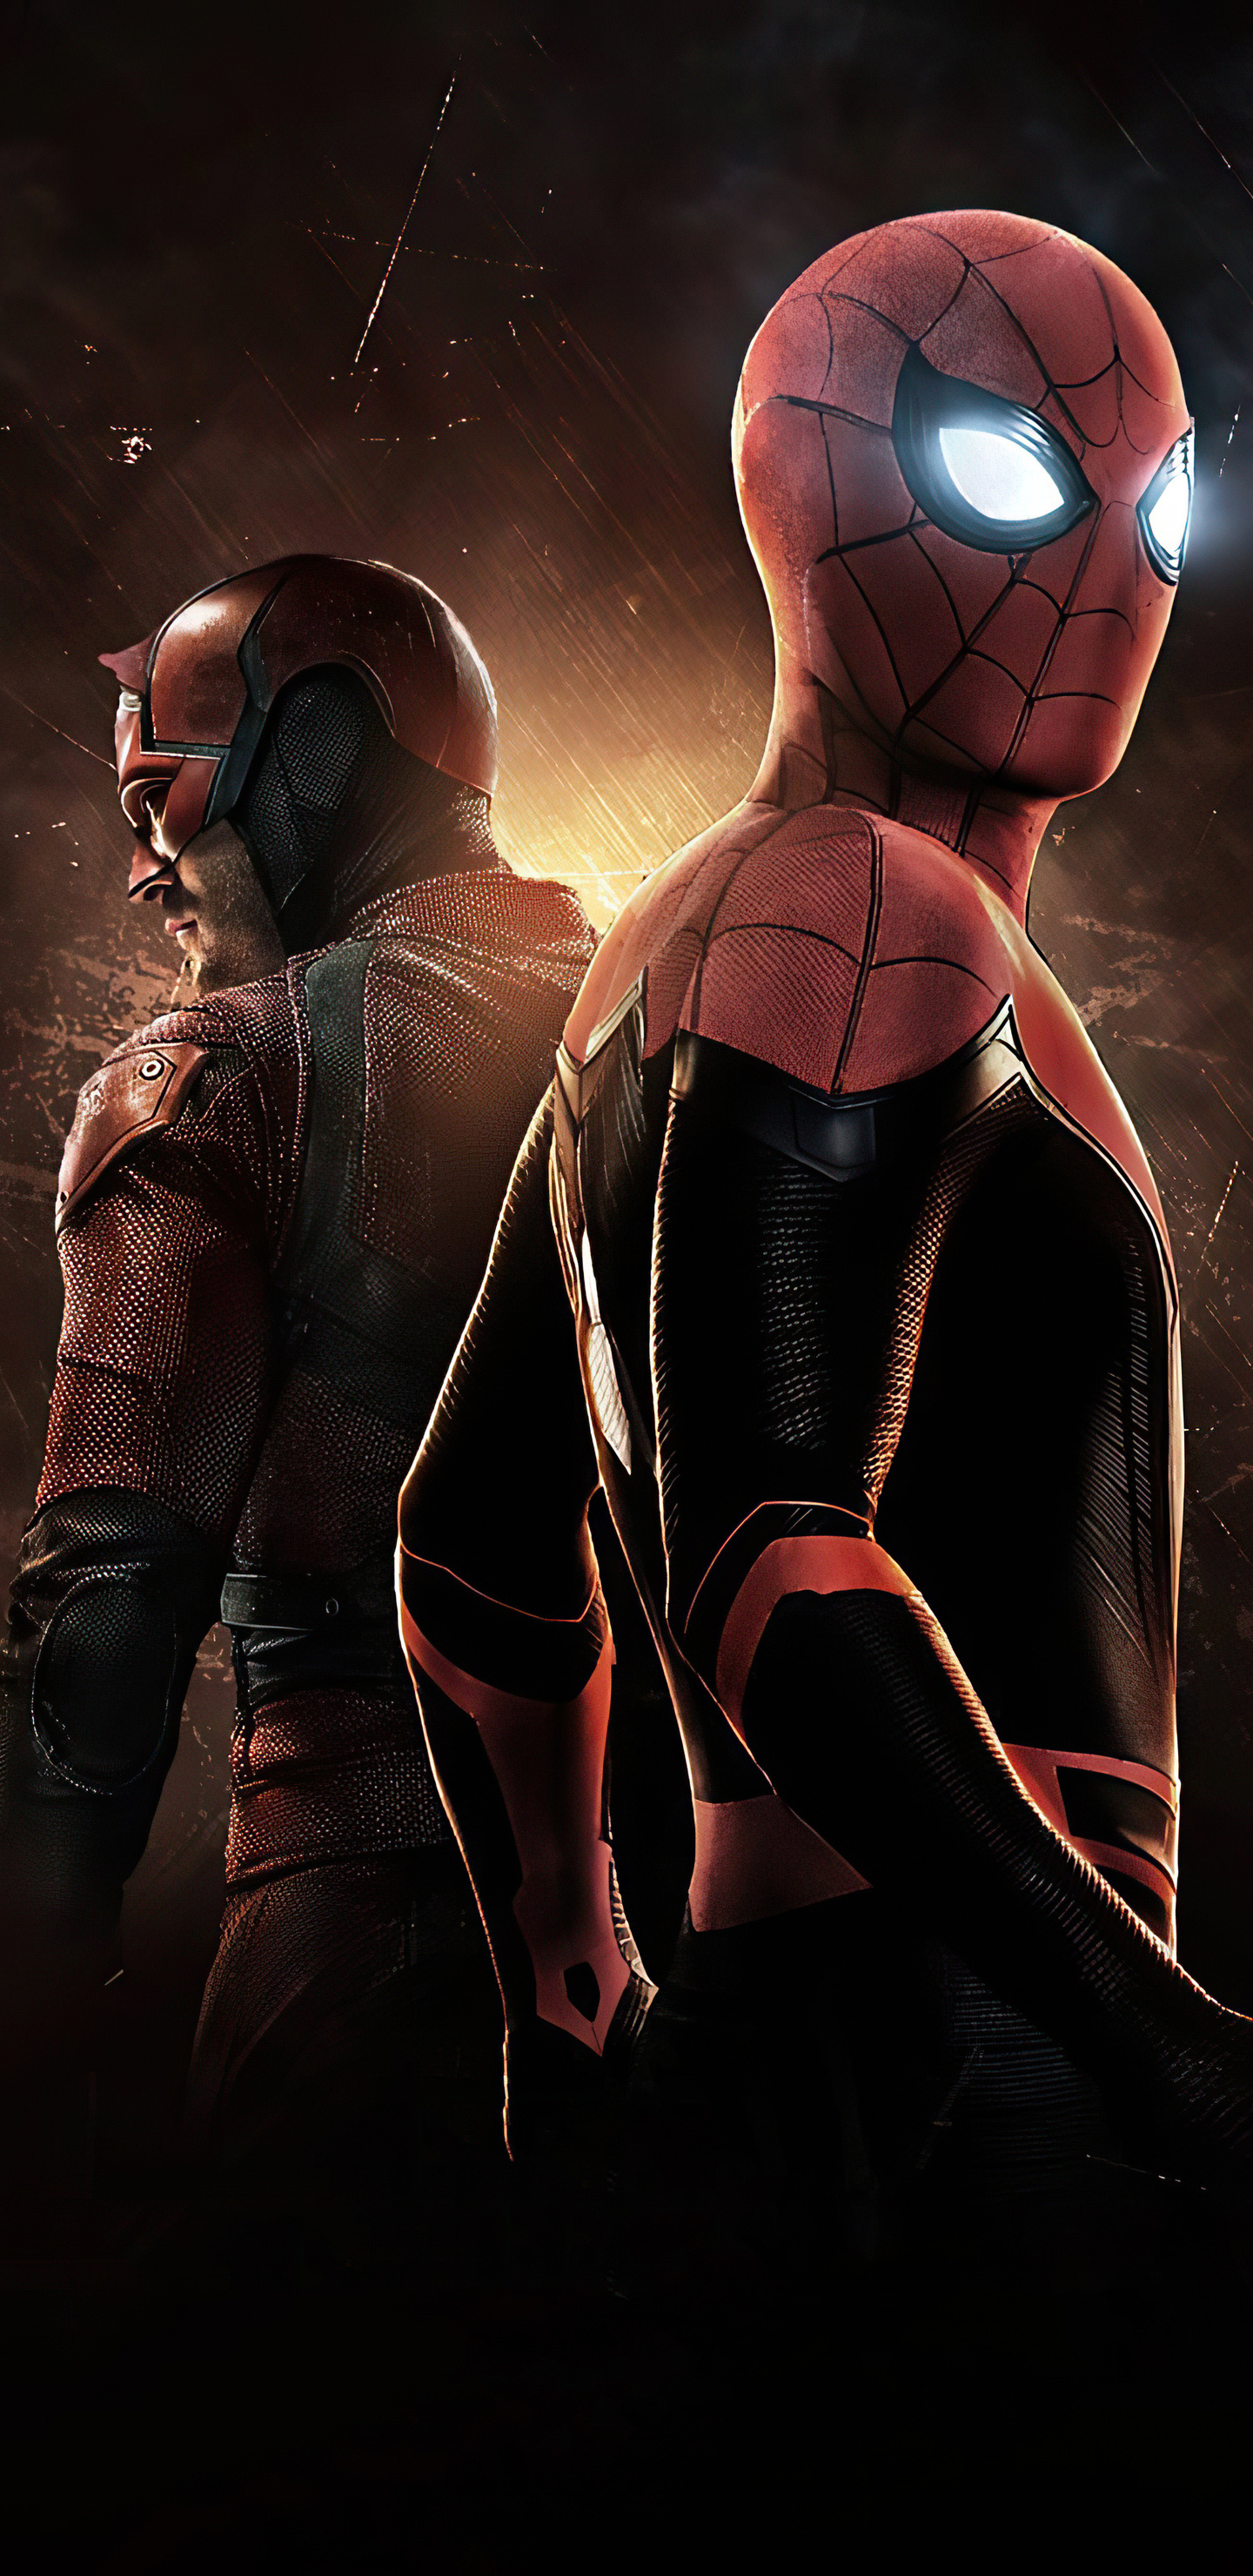 Spider-Man and Daredevil, 4K Samsung Galaxy, Note 9, Superhero wallpapers, 1440x2960 HD Phone